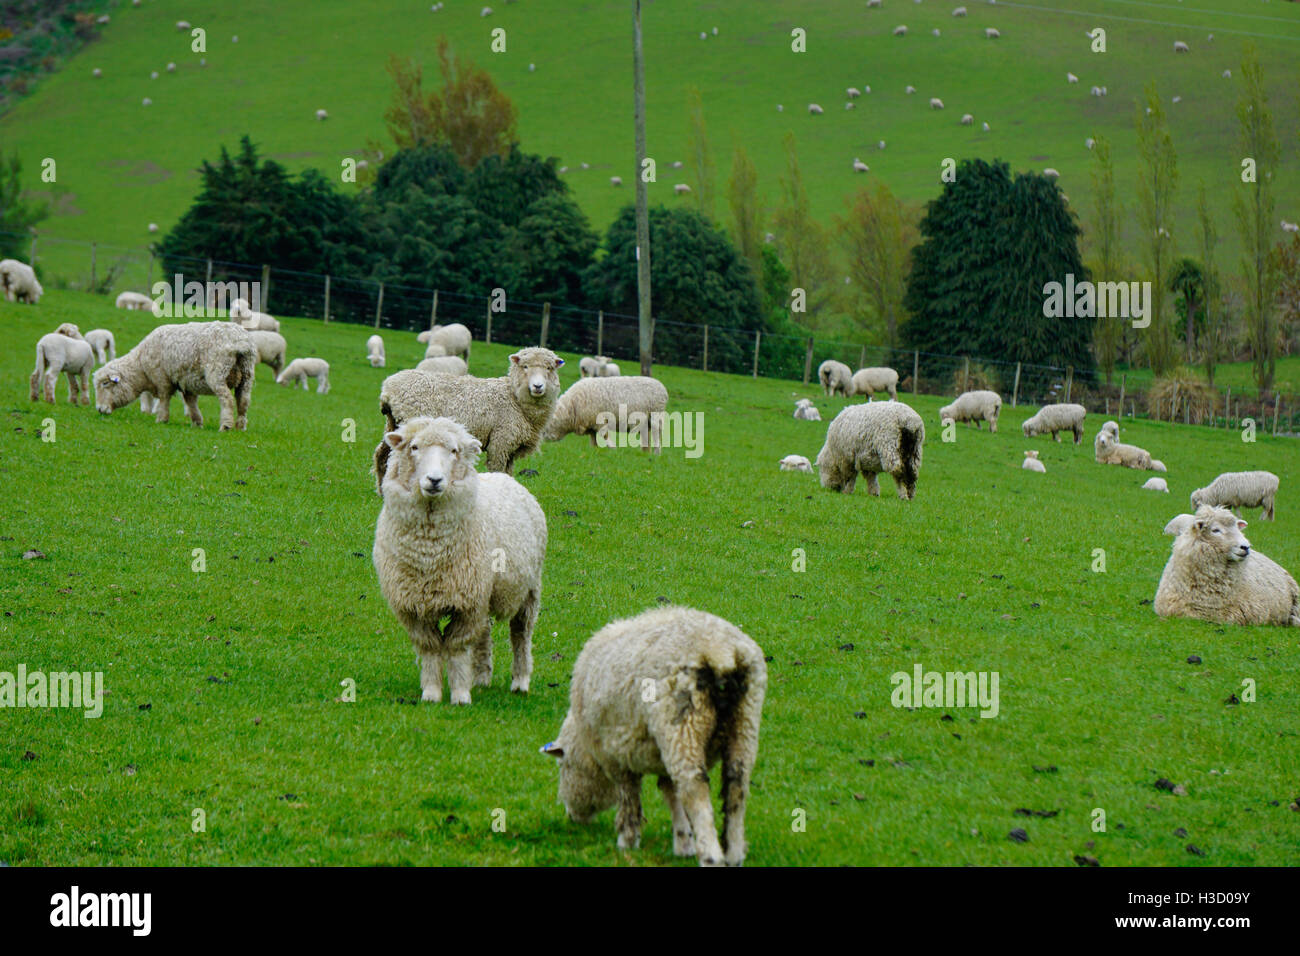 Beautiful landscape of sheep farm with sheep and lamb walking on the green grass Stock Photo